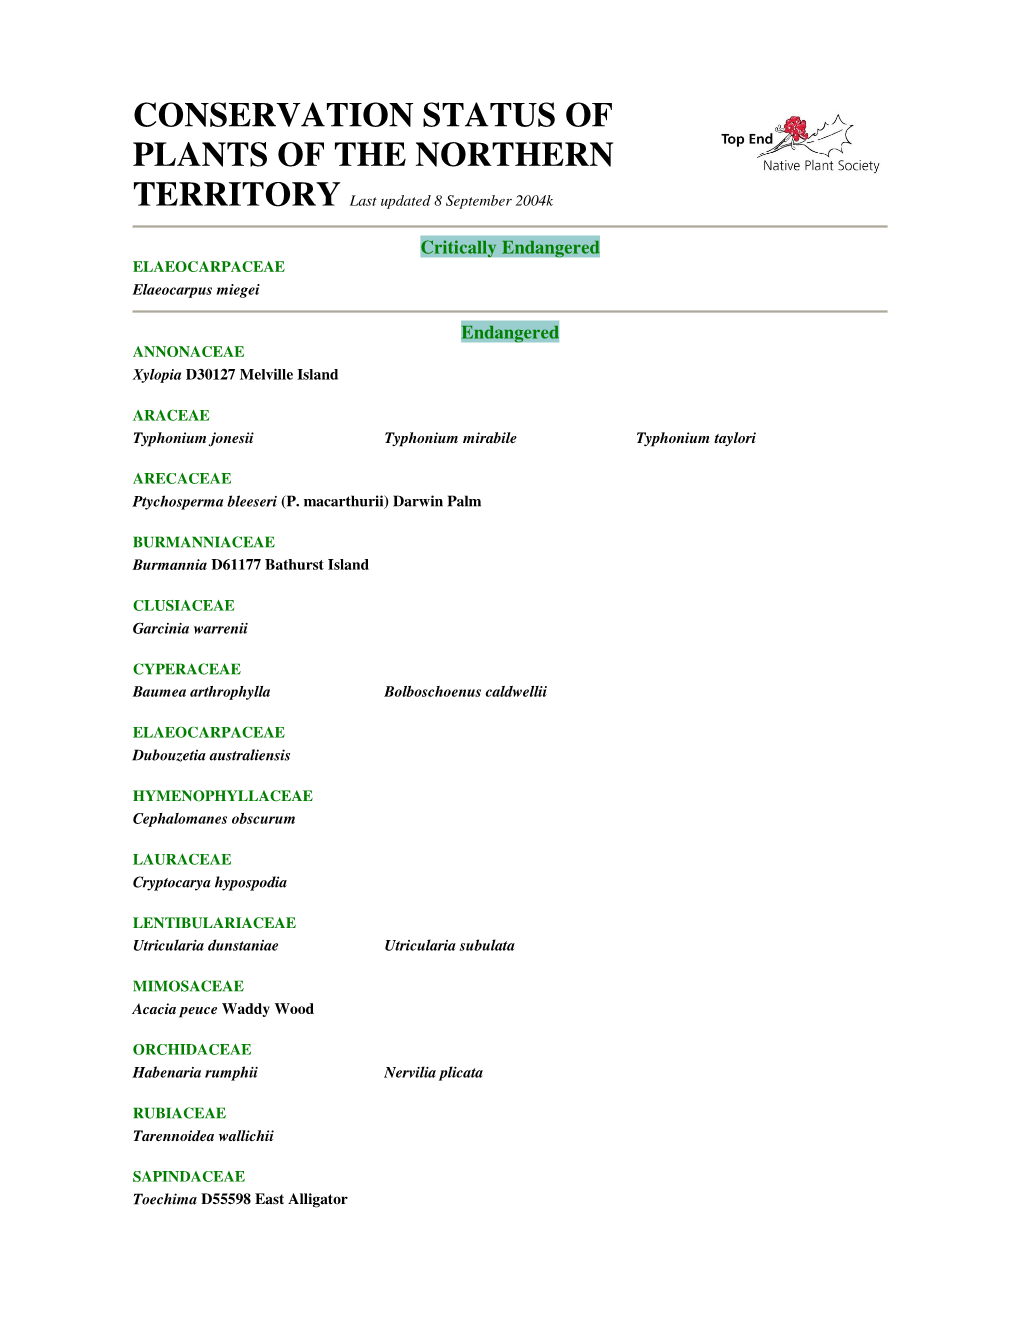 CONSERVATION STATUS of PLANTS of the NORTHERN TERRITORY Last Updated 8 September 2004K